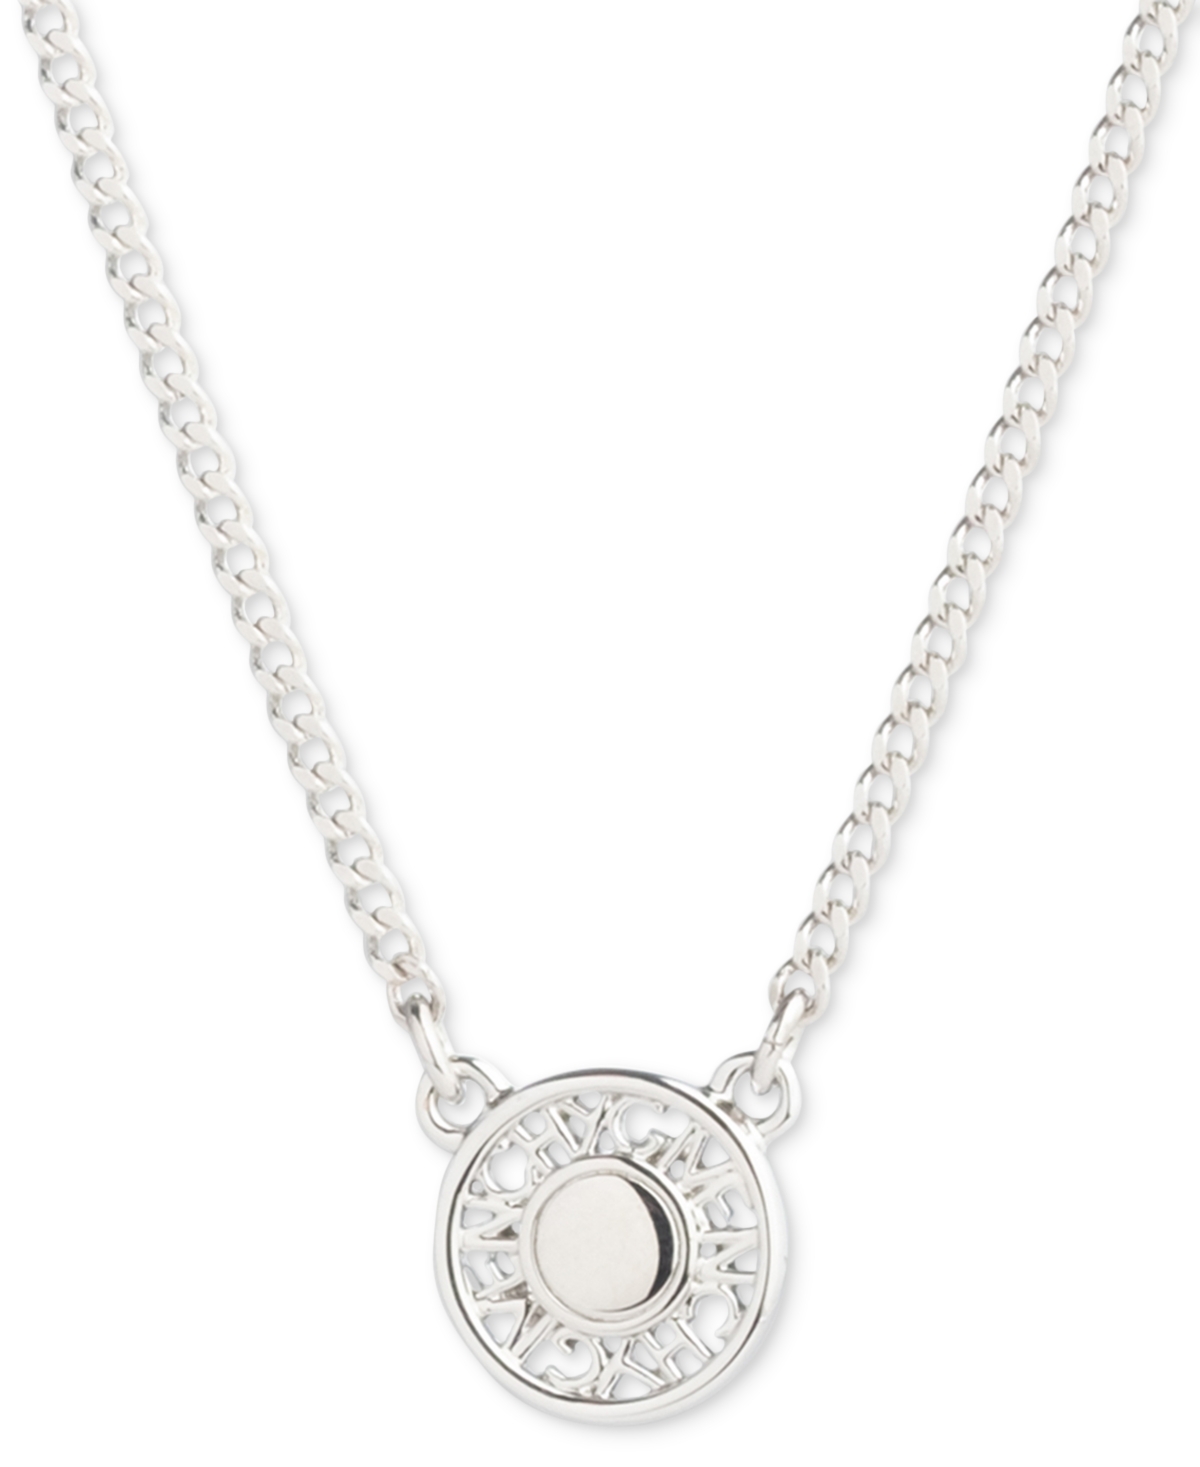 Givenchy Logo Embossed Coin Pendant Necklace, 16" + 3" Extender In Silver